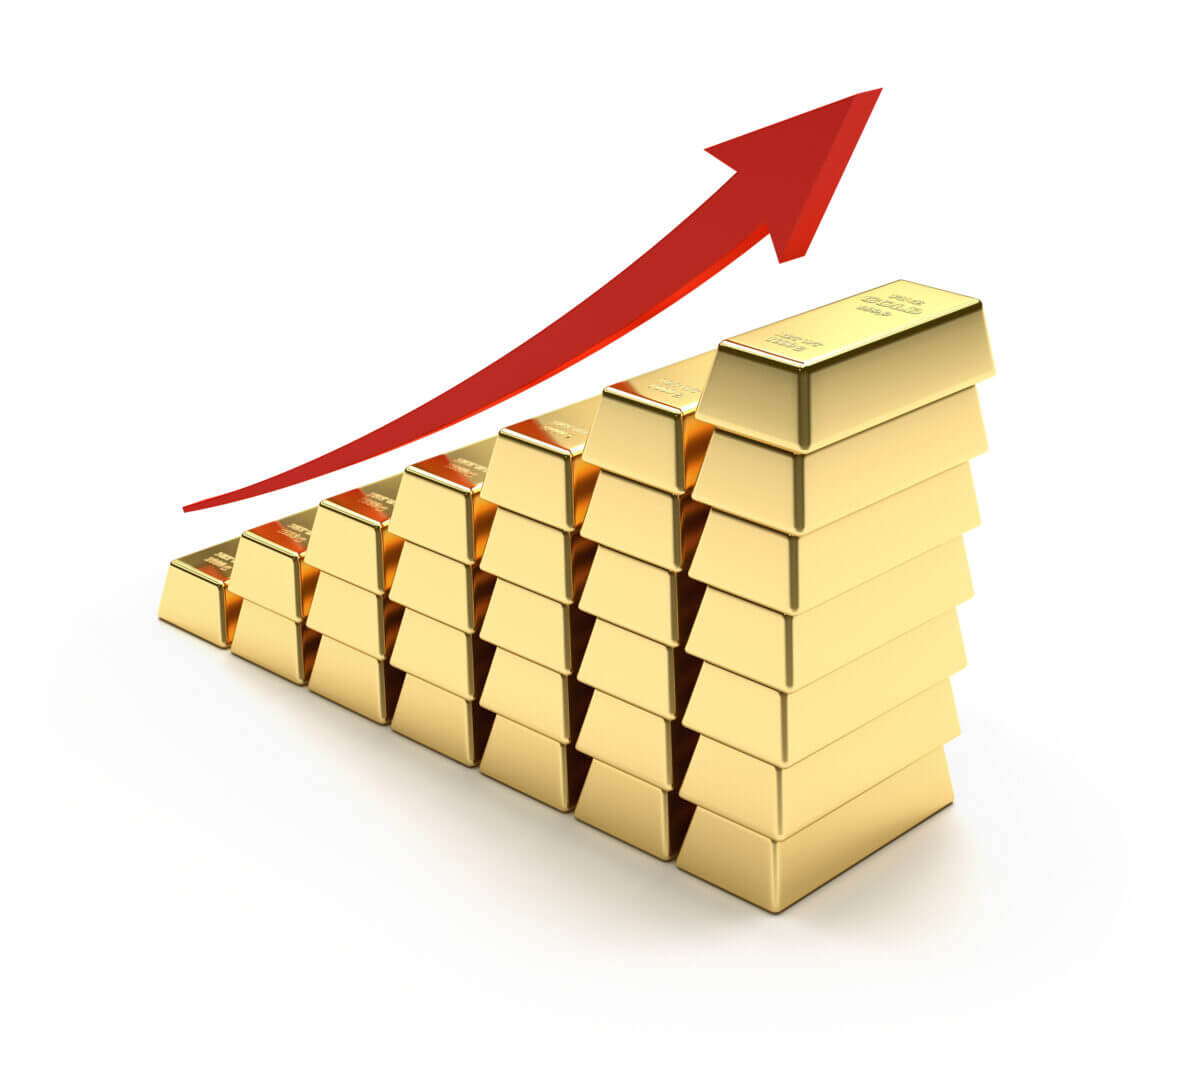 Spot price of gold and global economic problems